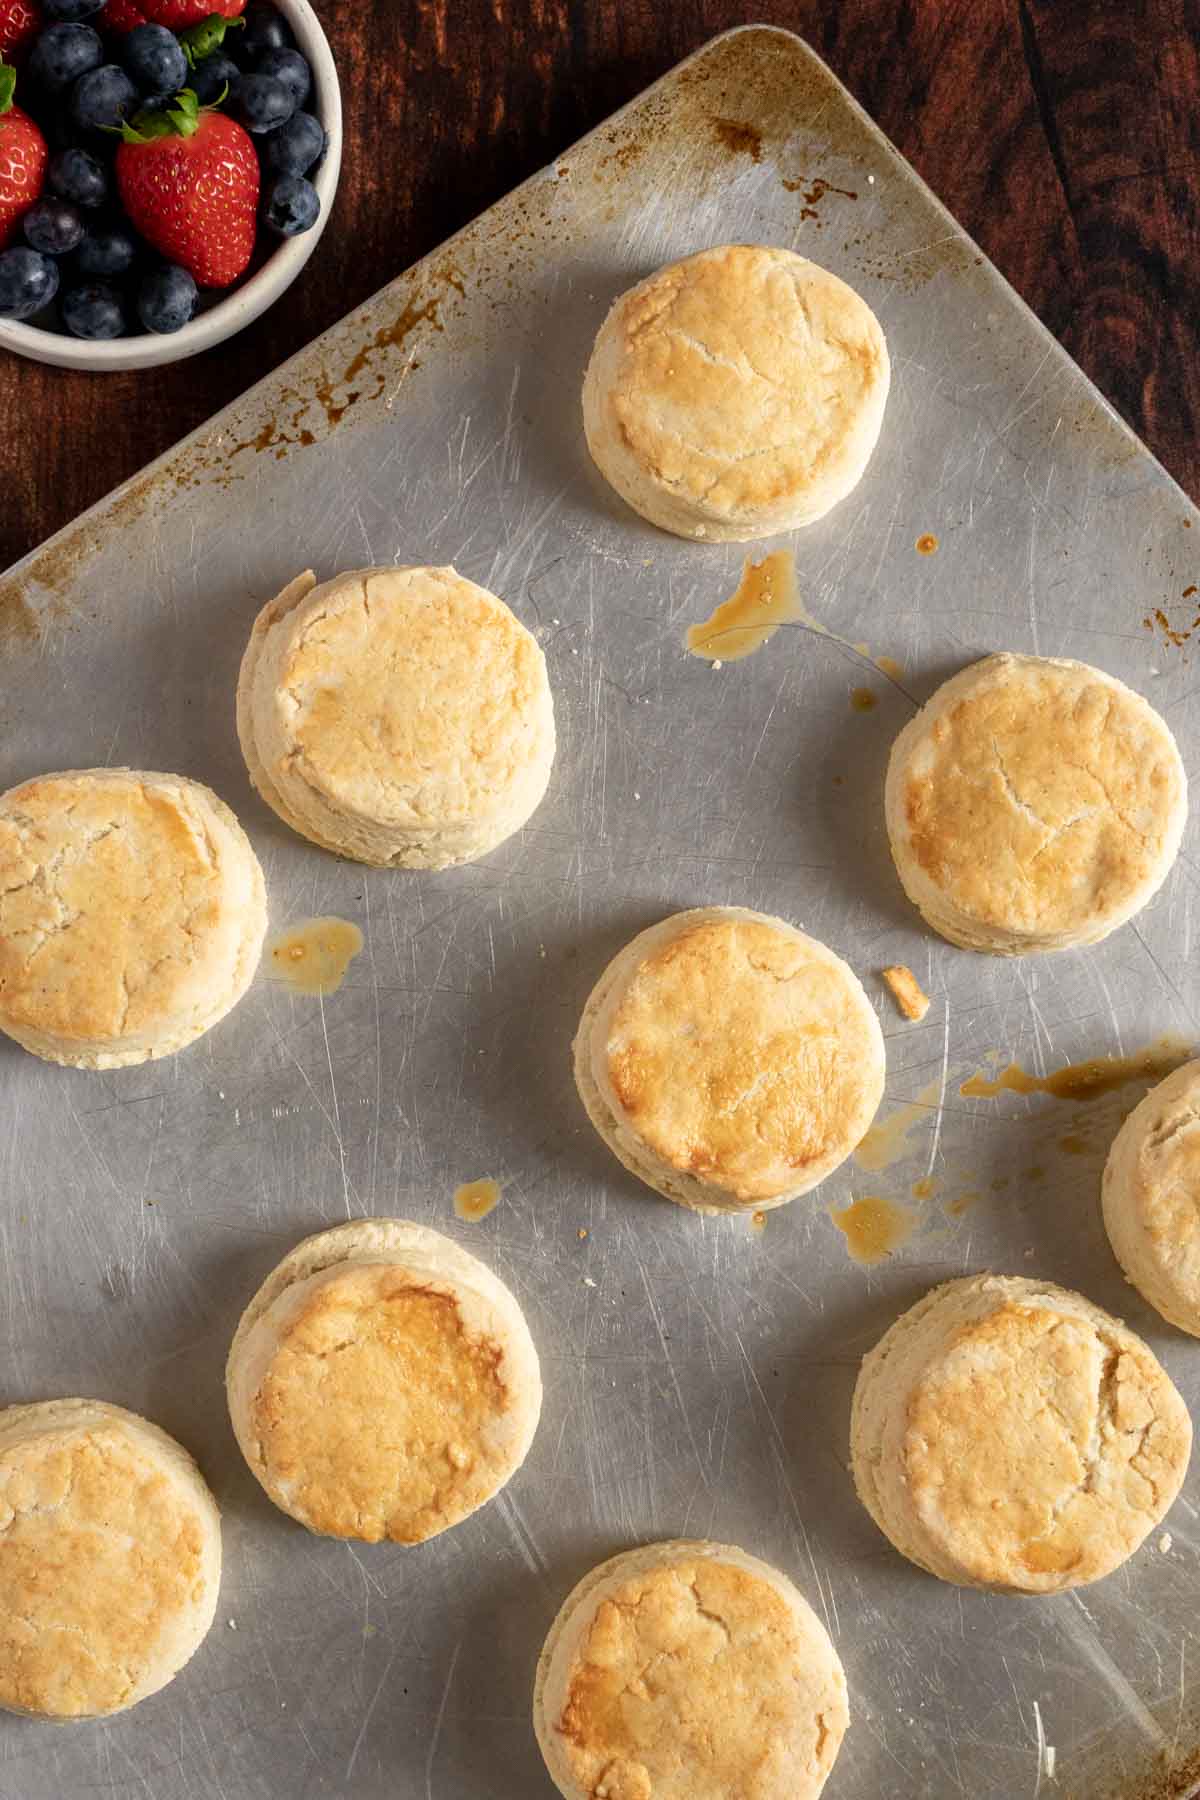 Biscuits cooling on a baking sheet.